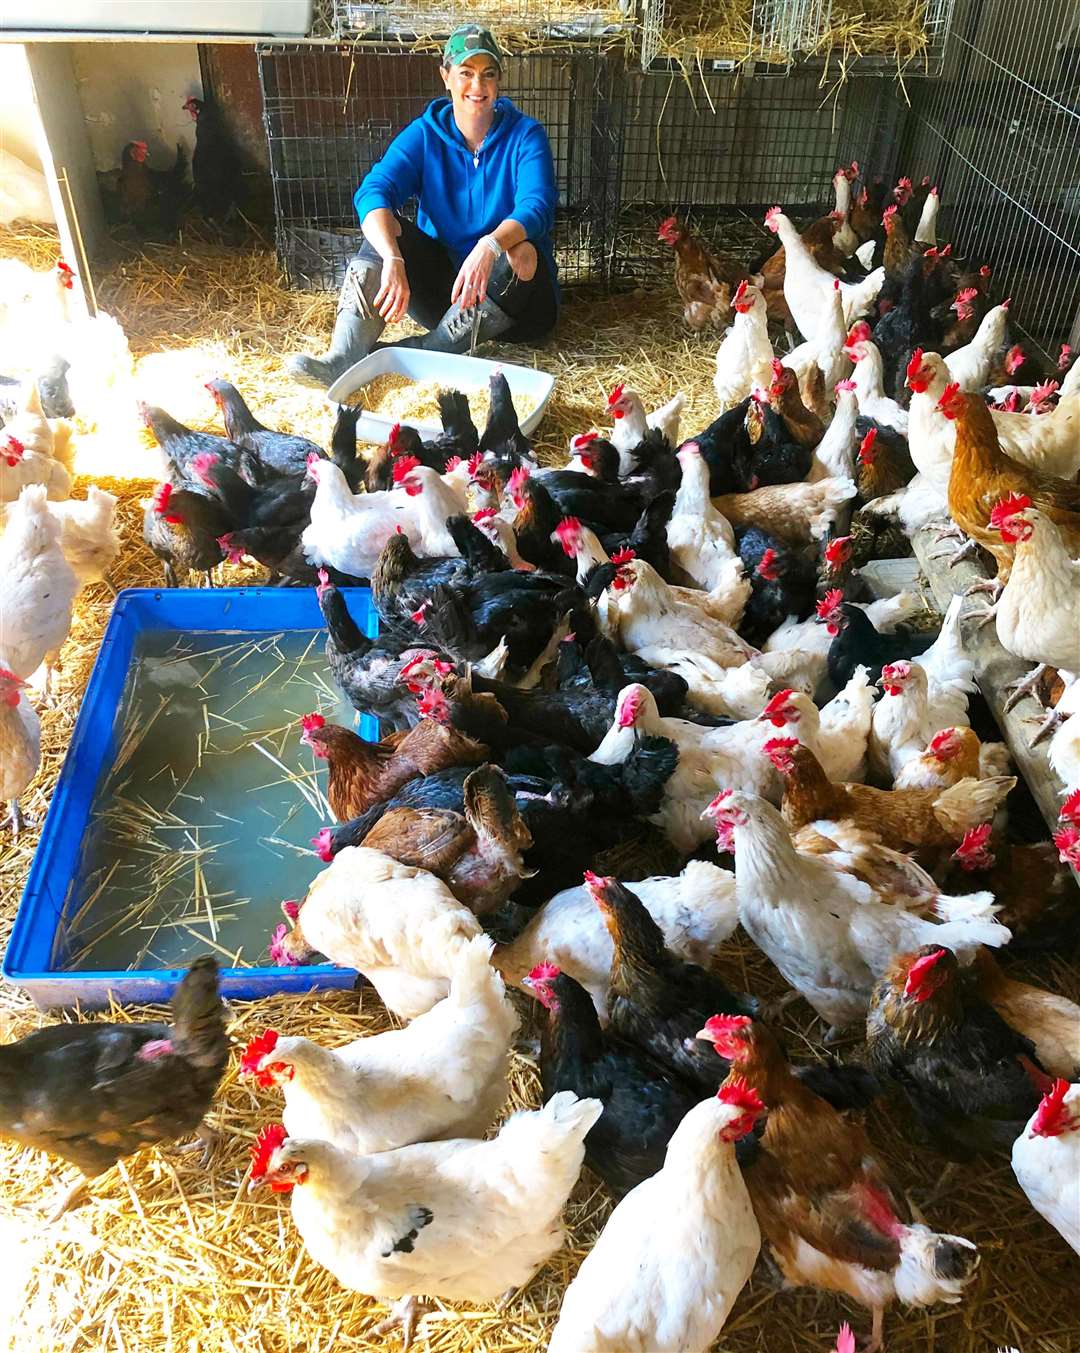 Happy Pants Ranch founder Amey James, with her newly-rescued hens, amongst the older chickens she already has